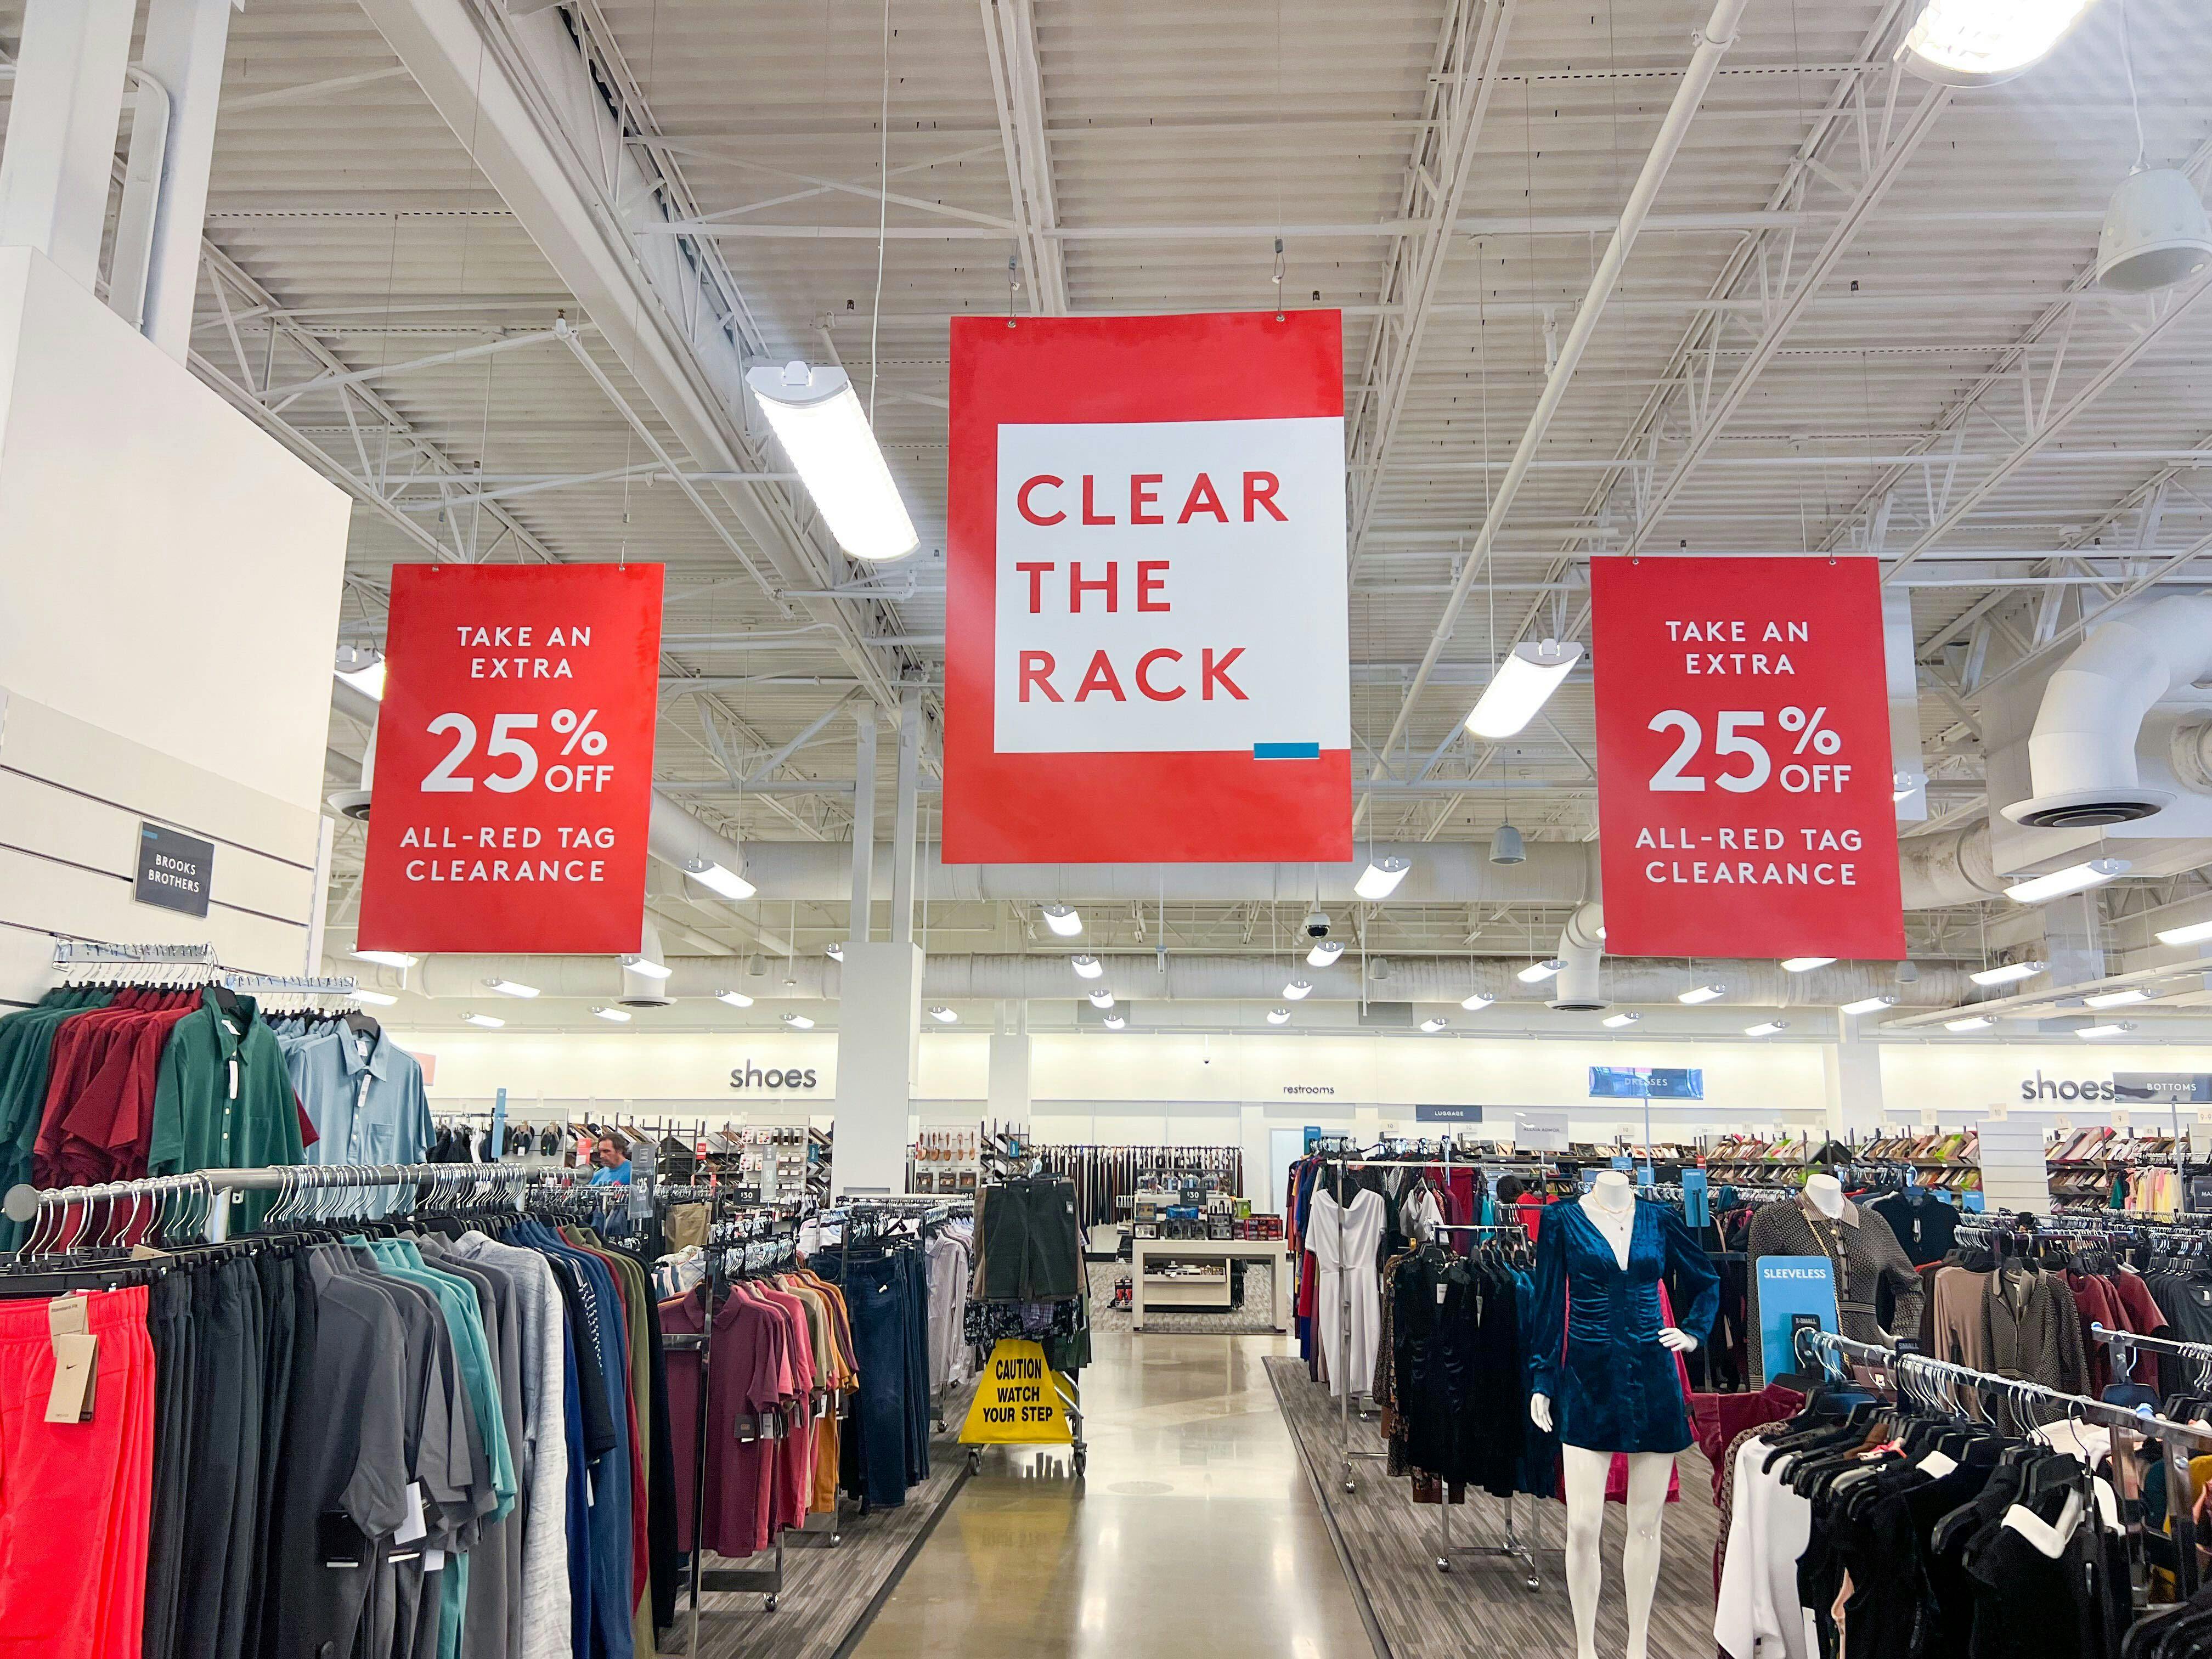 Nordstrom Rack: Save up to 95% on clearance items - Clark Deals